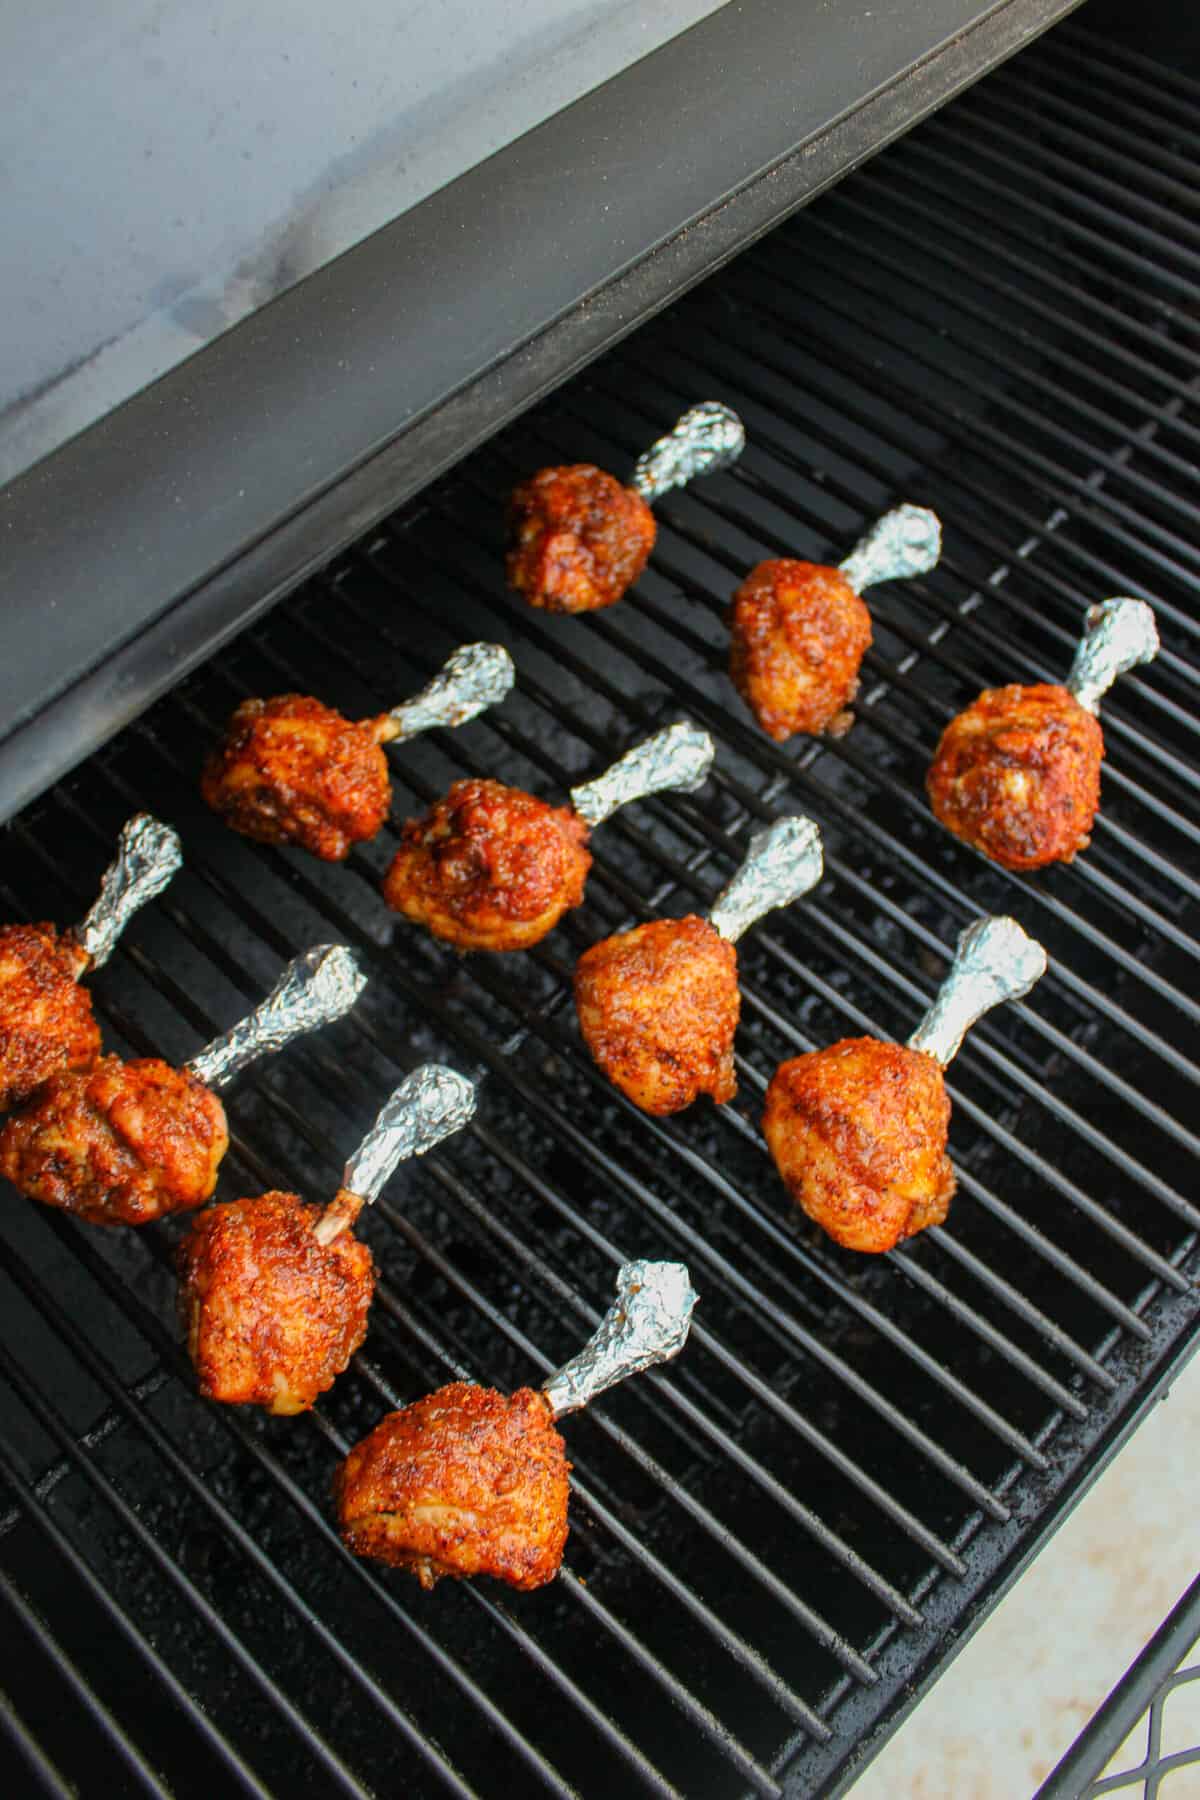 Some chicken lollipops sitting on the smoker.